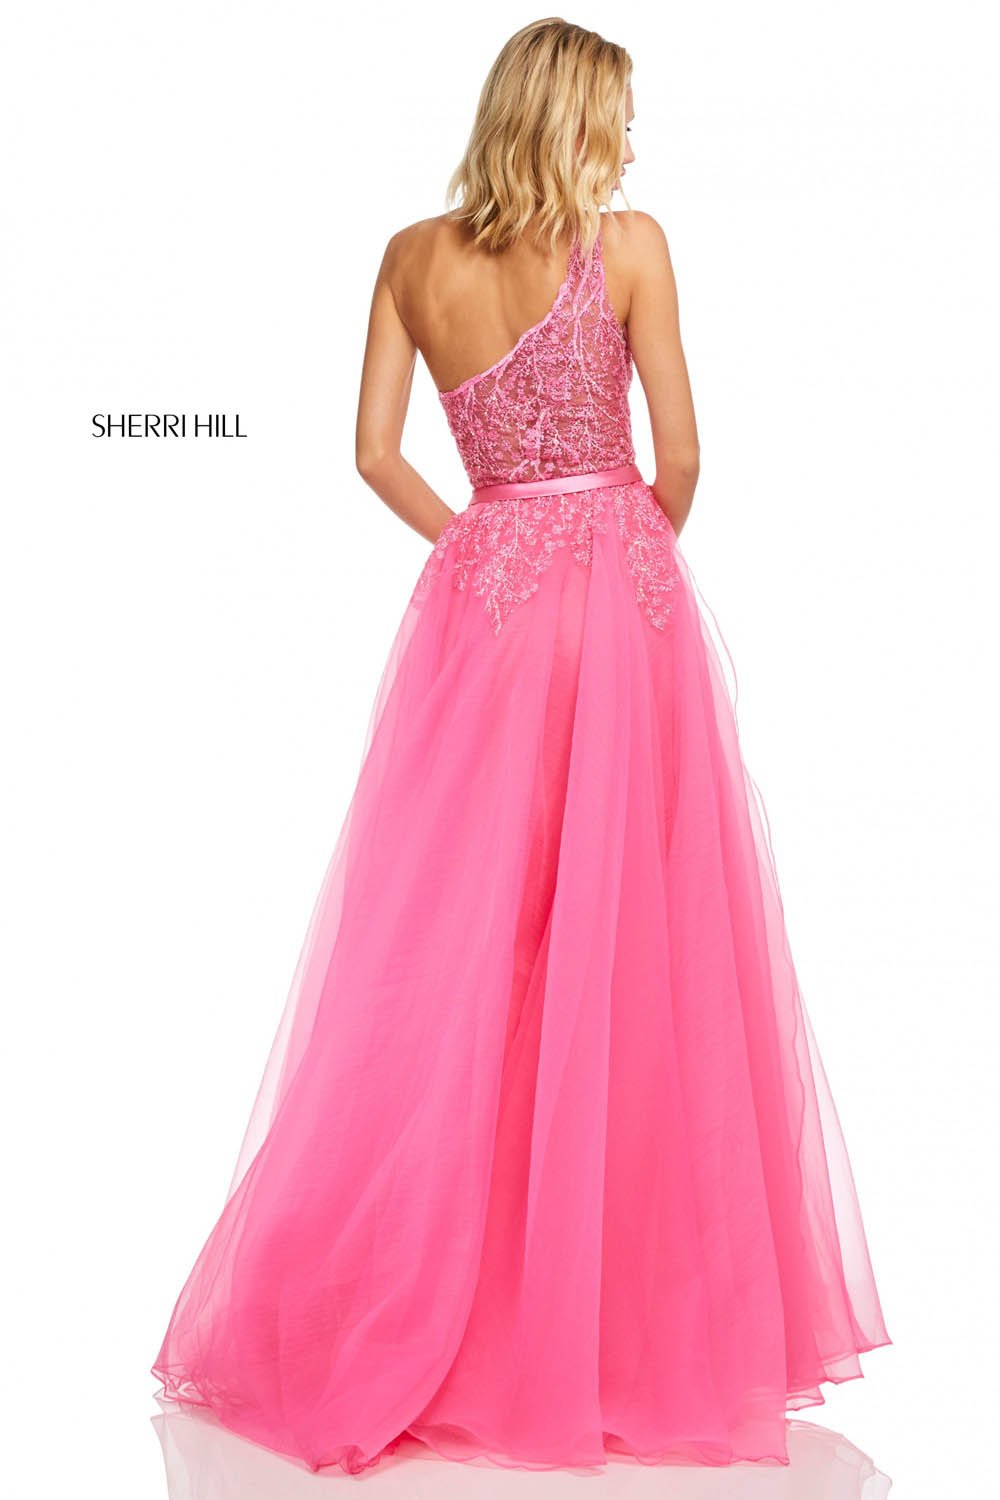 Sherri Hill 52736 dress images in these colors: Ivory, Hot Pink, Yellow, Orange.